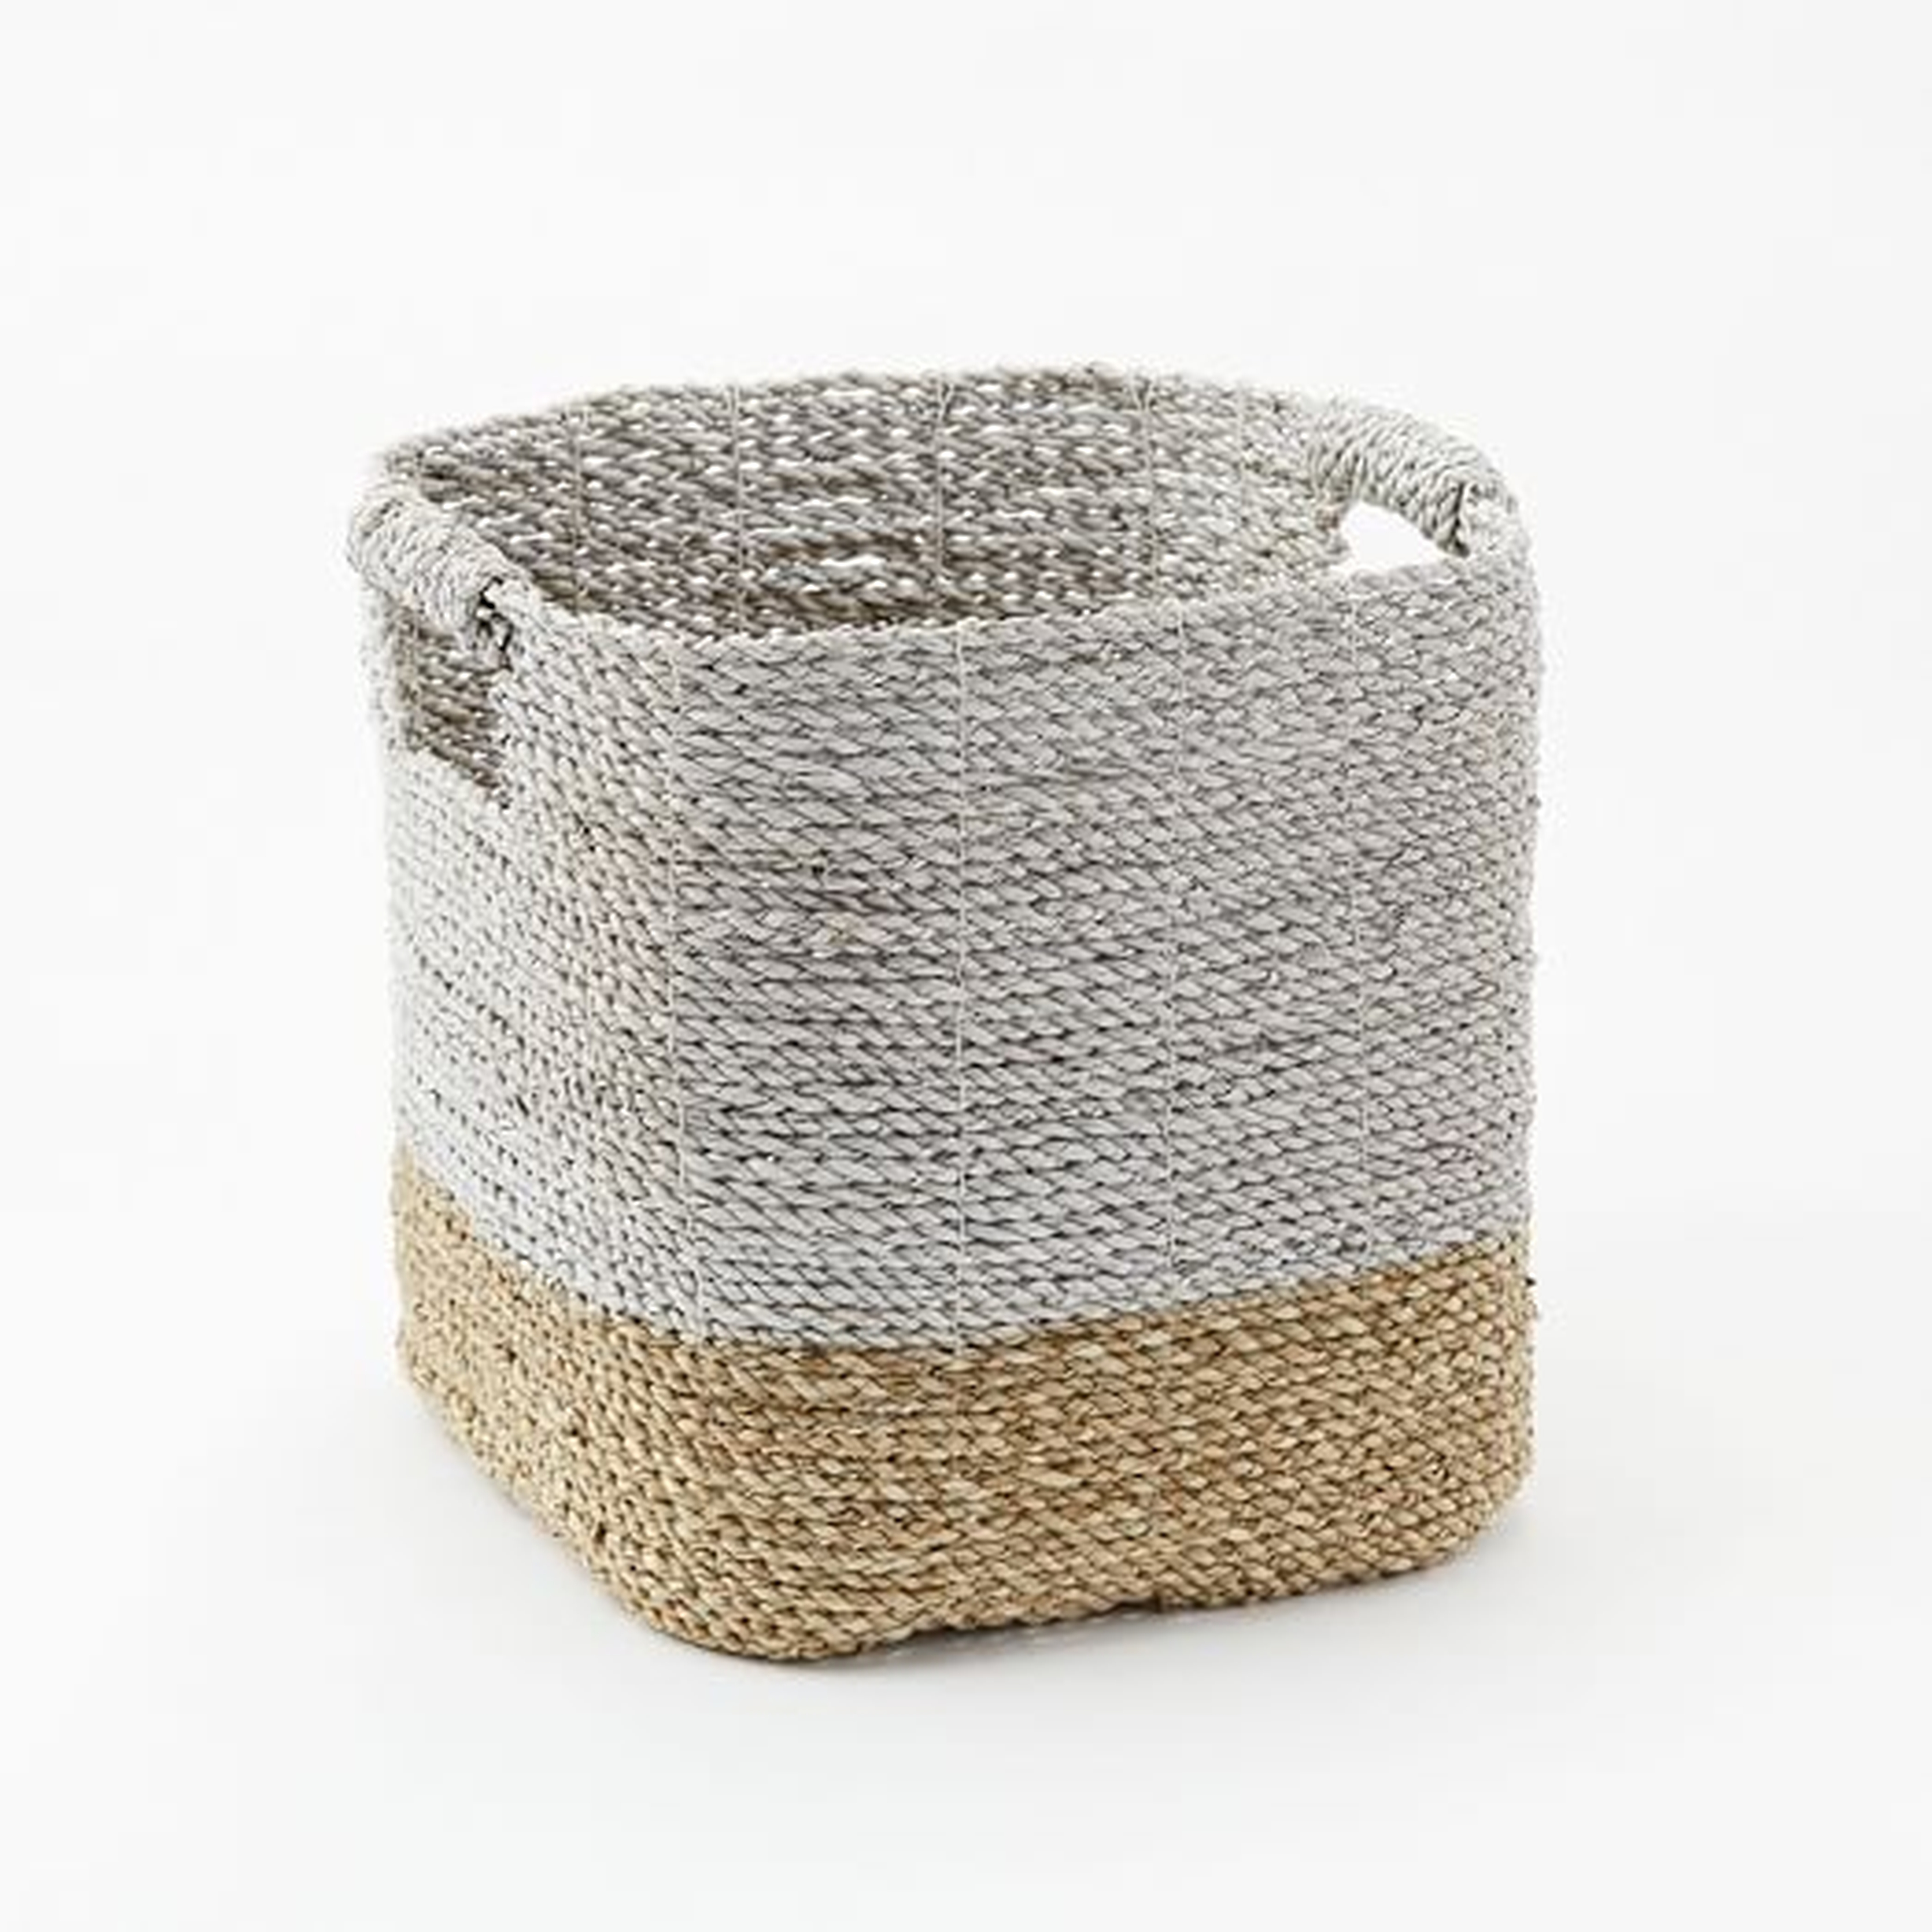 Two-Tone Woven Baskets - Natural/White Storage Basket - West Elm